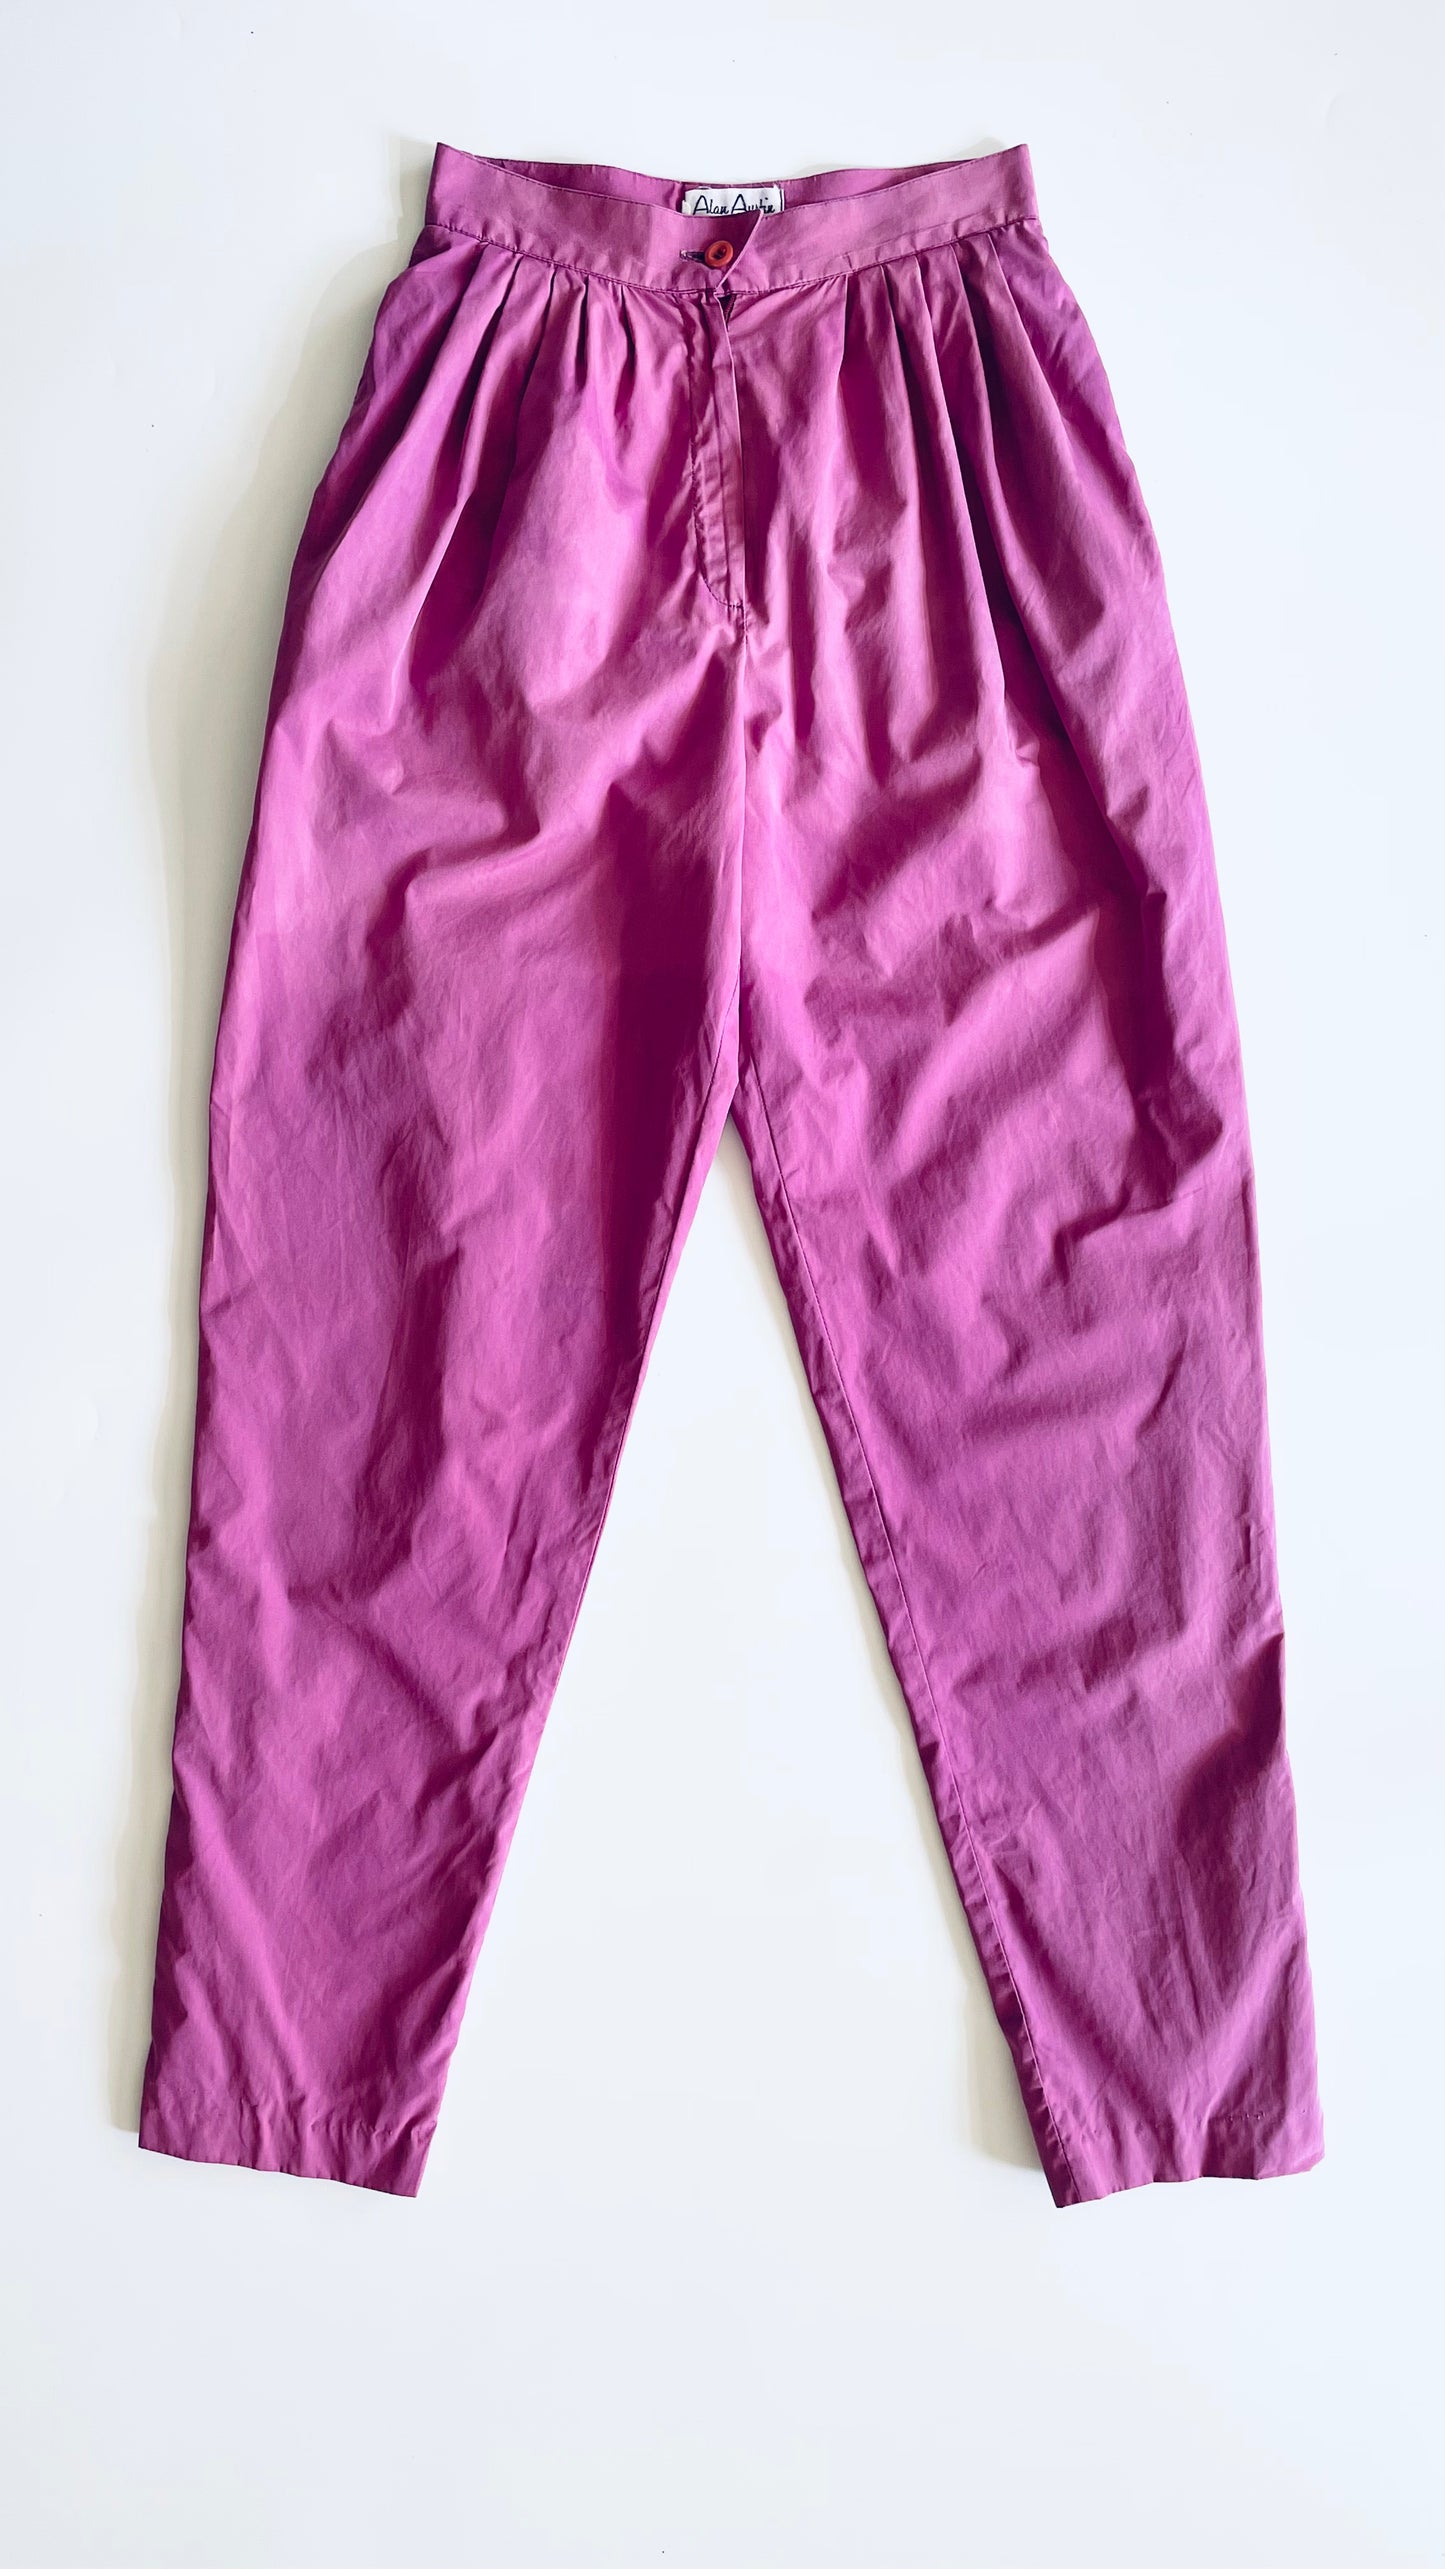 Vintage 80s fuchsia pink high rise trousers - Size 6